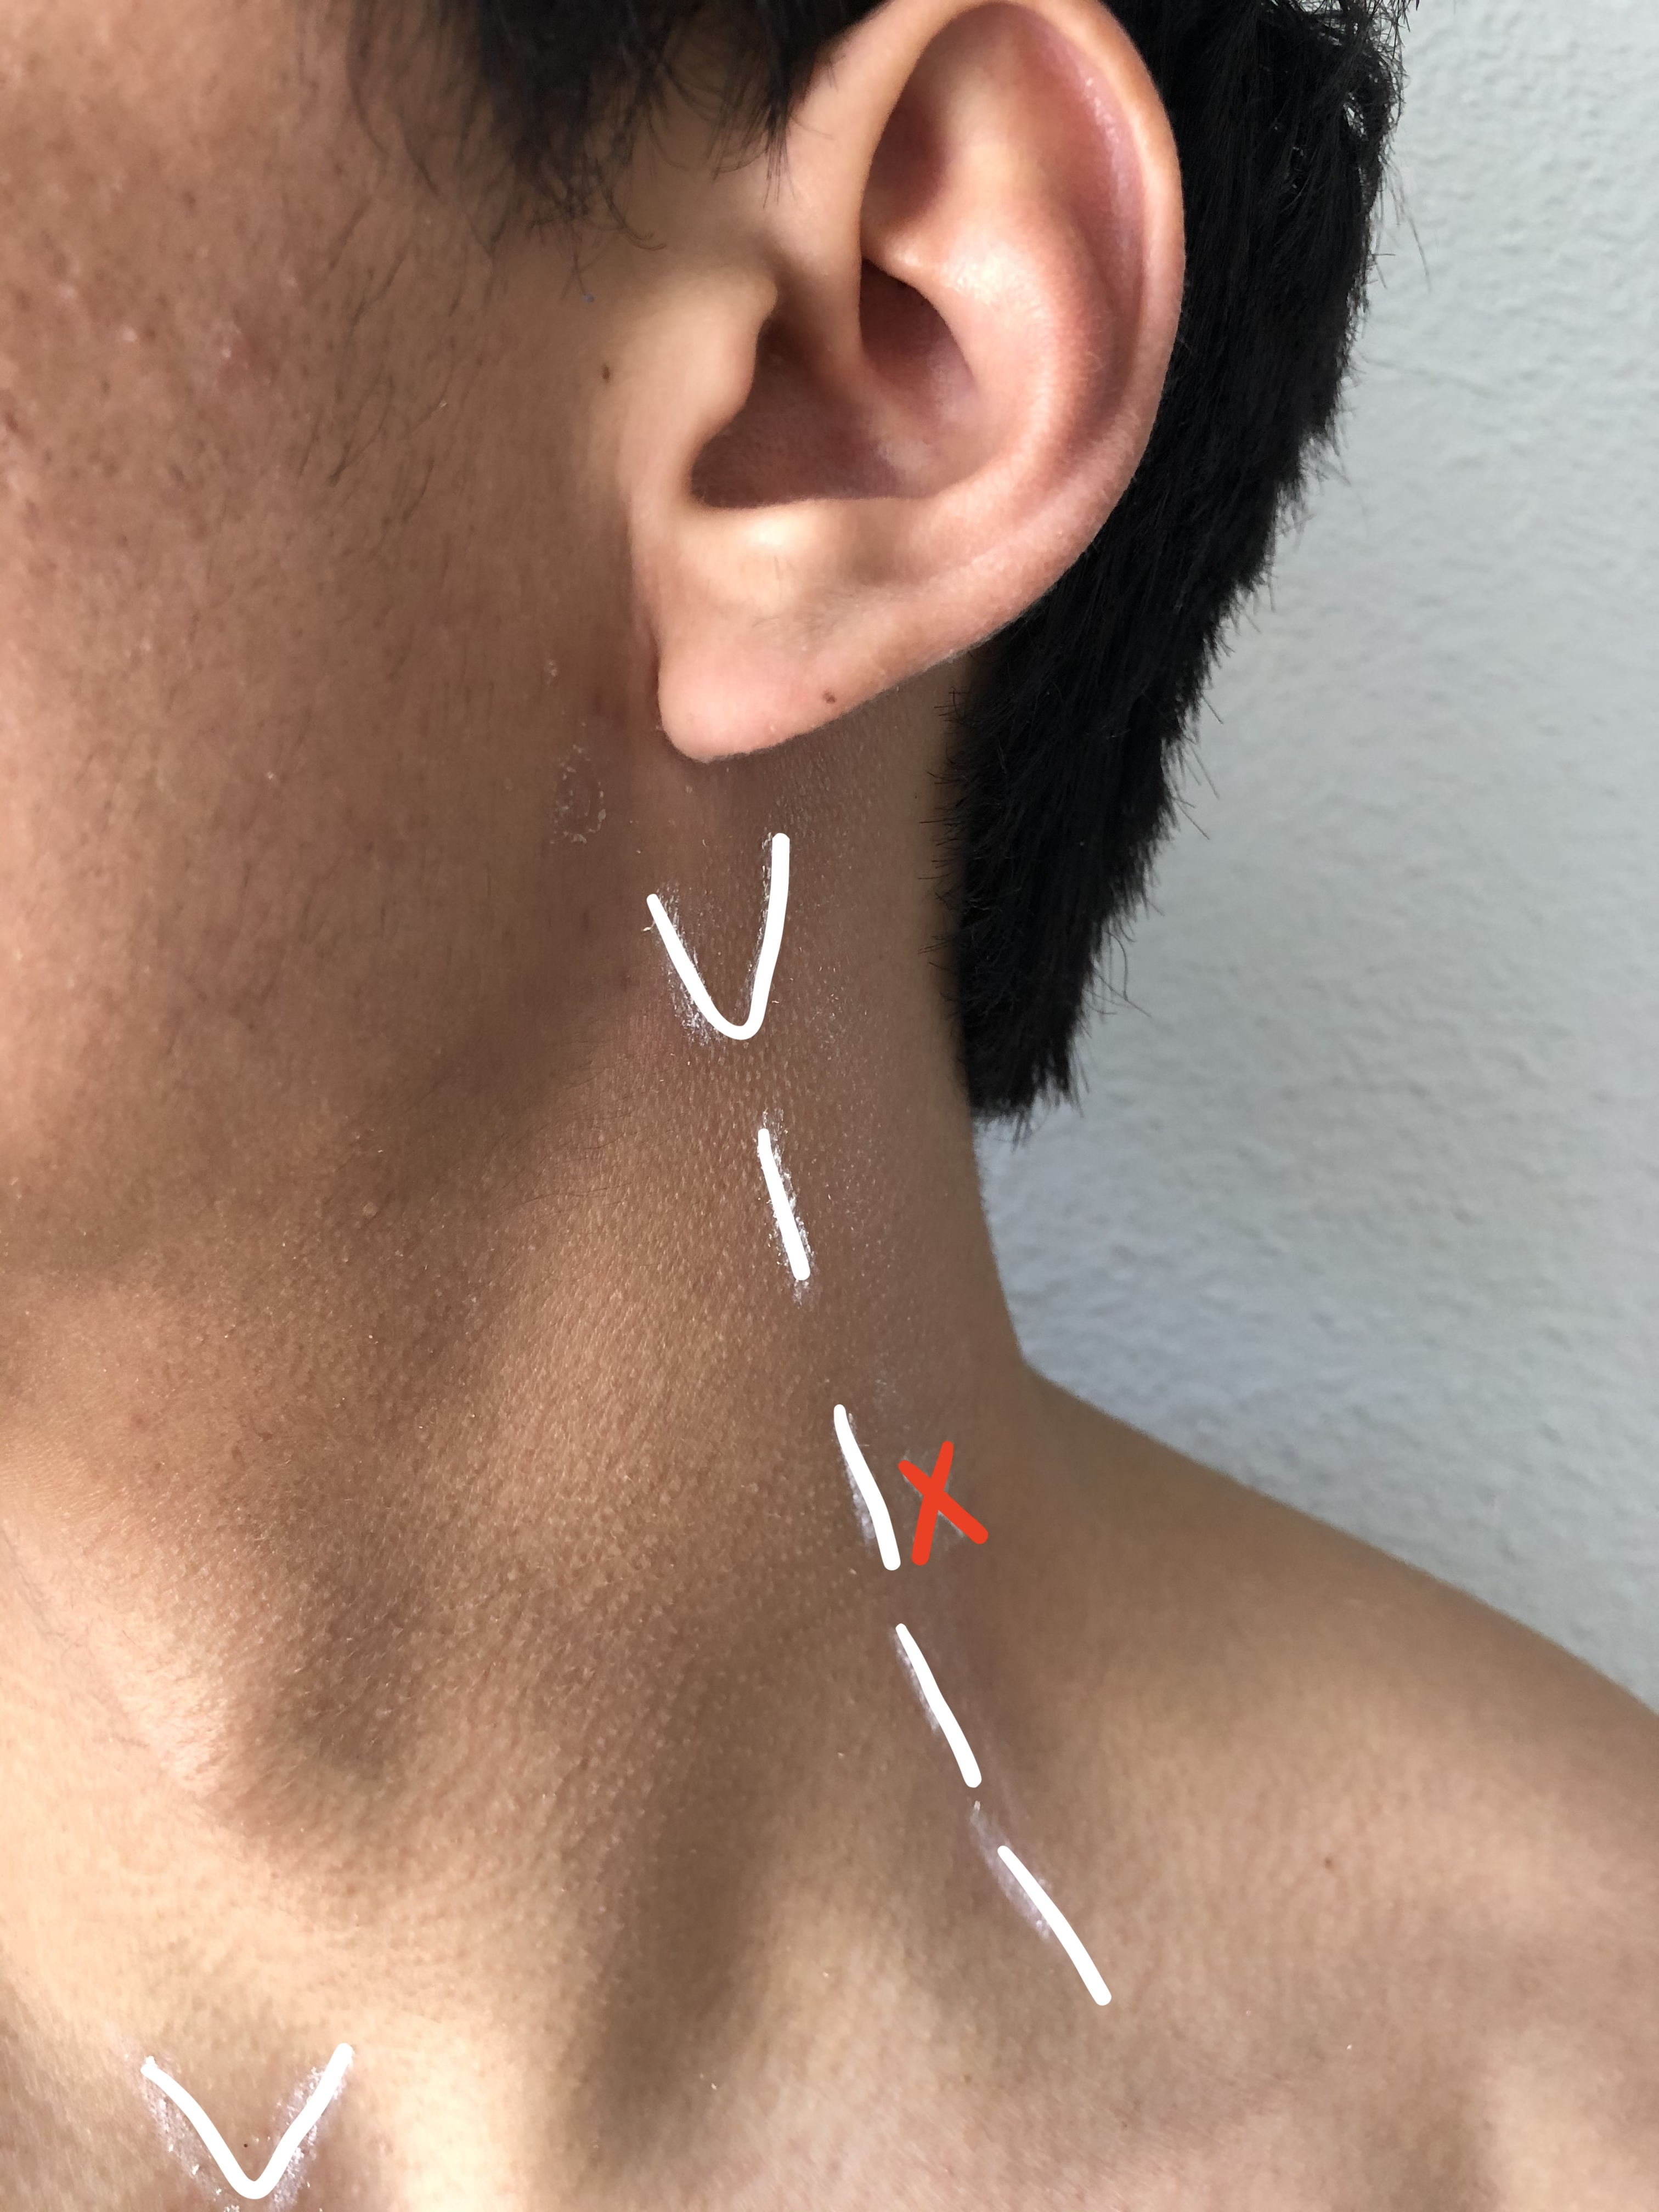 The white "V" inferior to earlobe is over the mastoid process. The dotted line is the posterior border of the sternocleidomastoid muscle. The red "X" is the mid-point where the block needle is inserted. The midline "V" is over the sternal notch.  This approximates the inferior aspect of the sternocleidomastoid muscle.